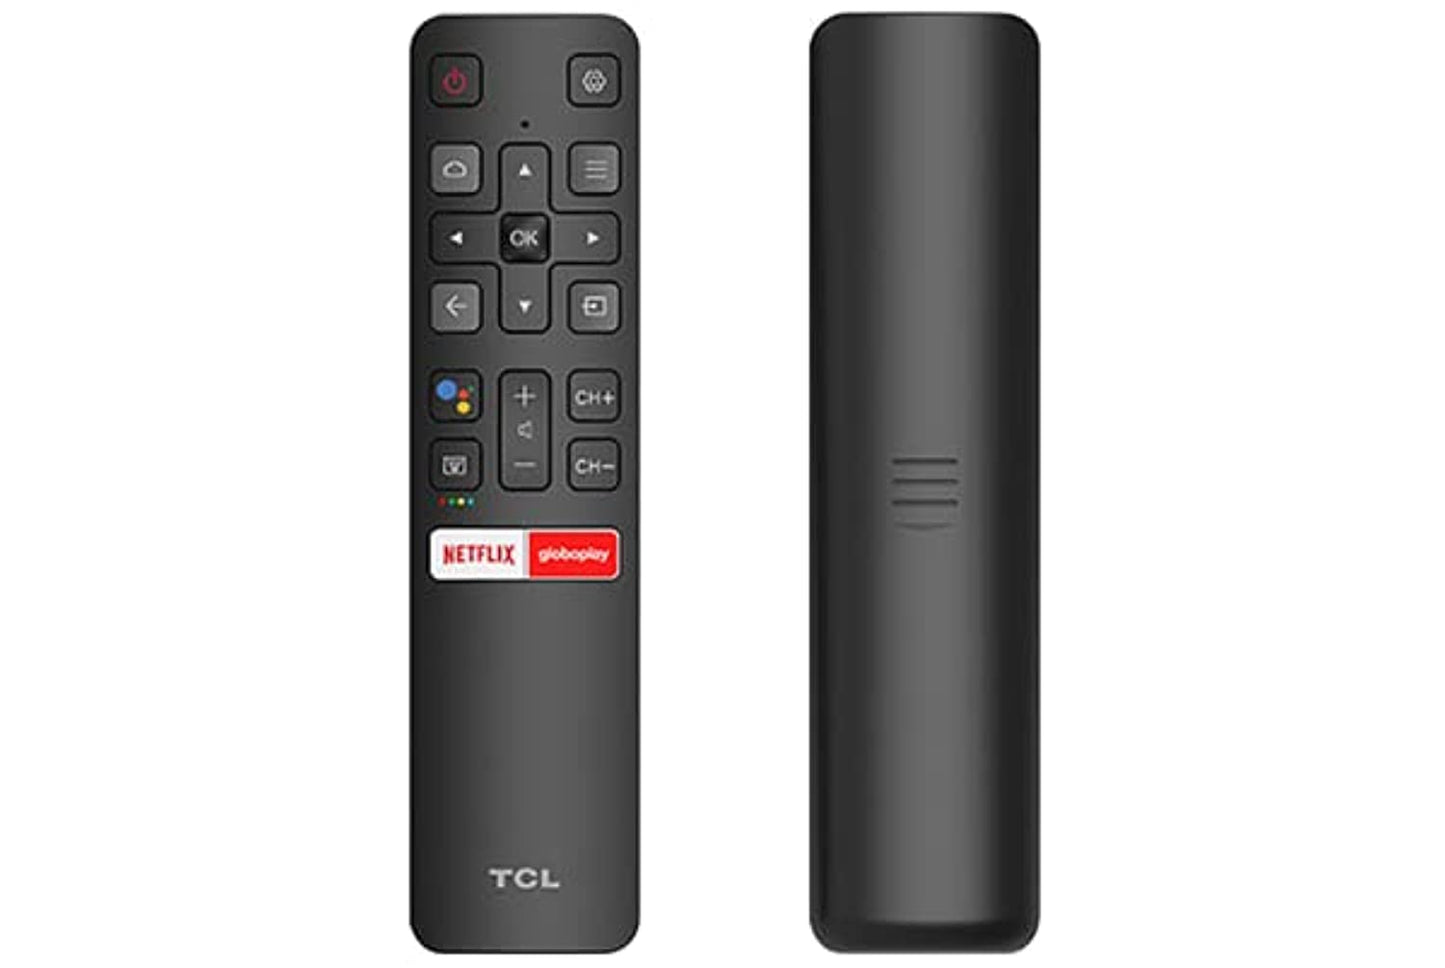 TCL 32 Inch HD AI Smart LED TV, Android TV, Google Assistant with Hands-Free Voice Control, Micro Dimming technology, Premium Streaming Channels-Netflix | Google Play | Starz Play, Slim Design 32S5200